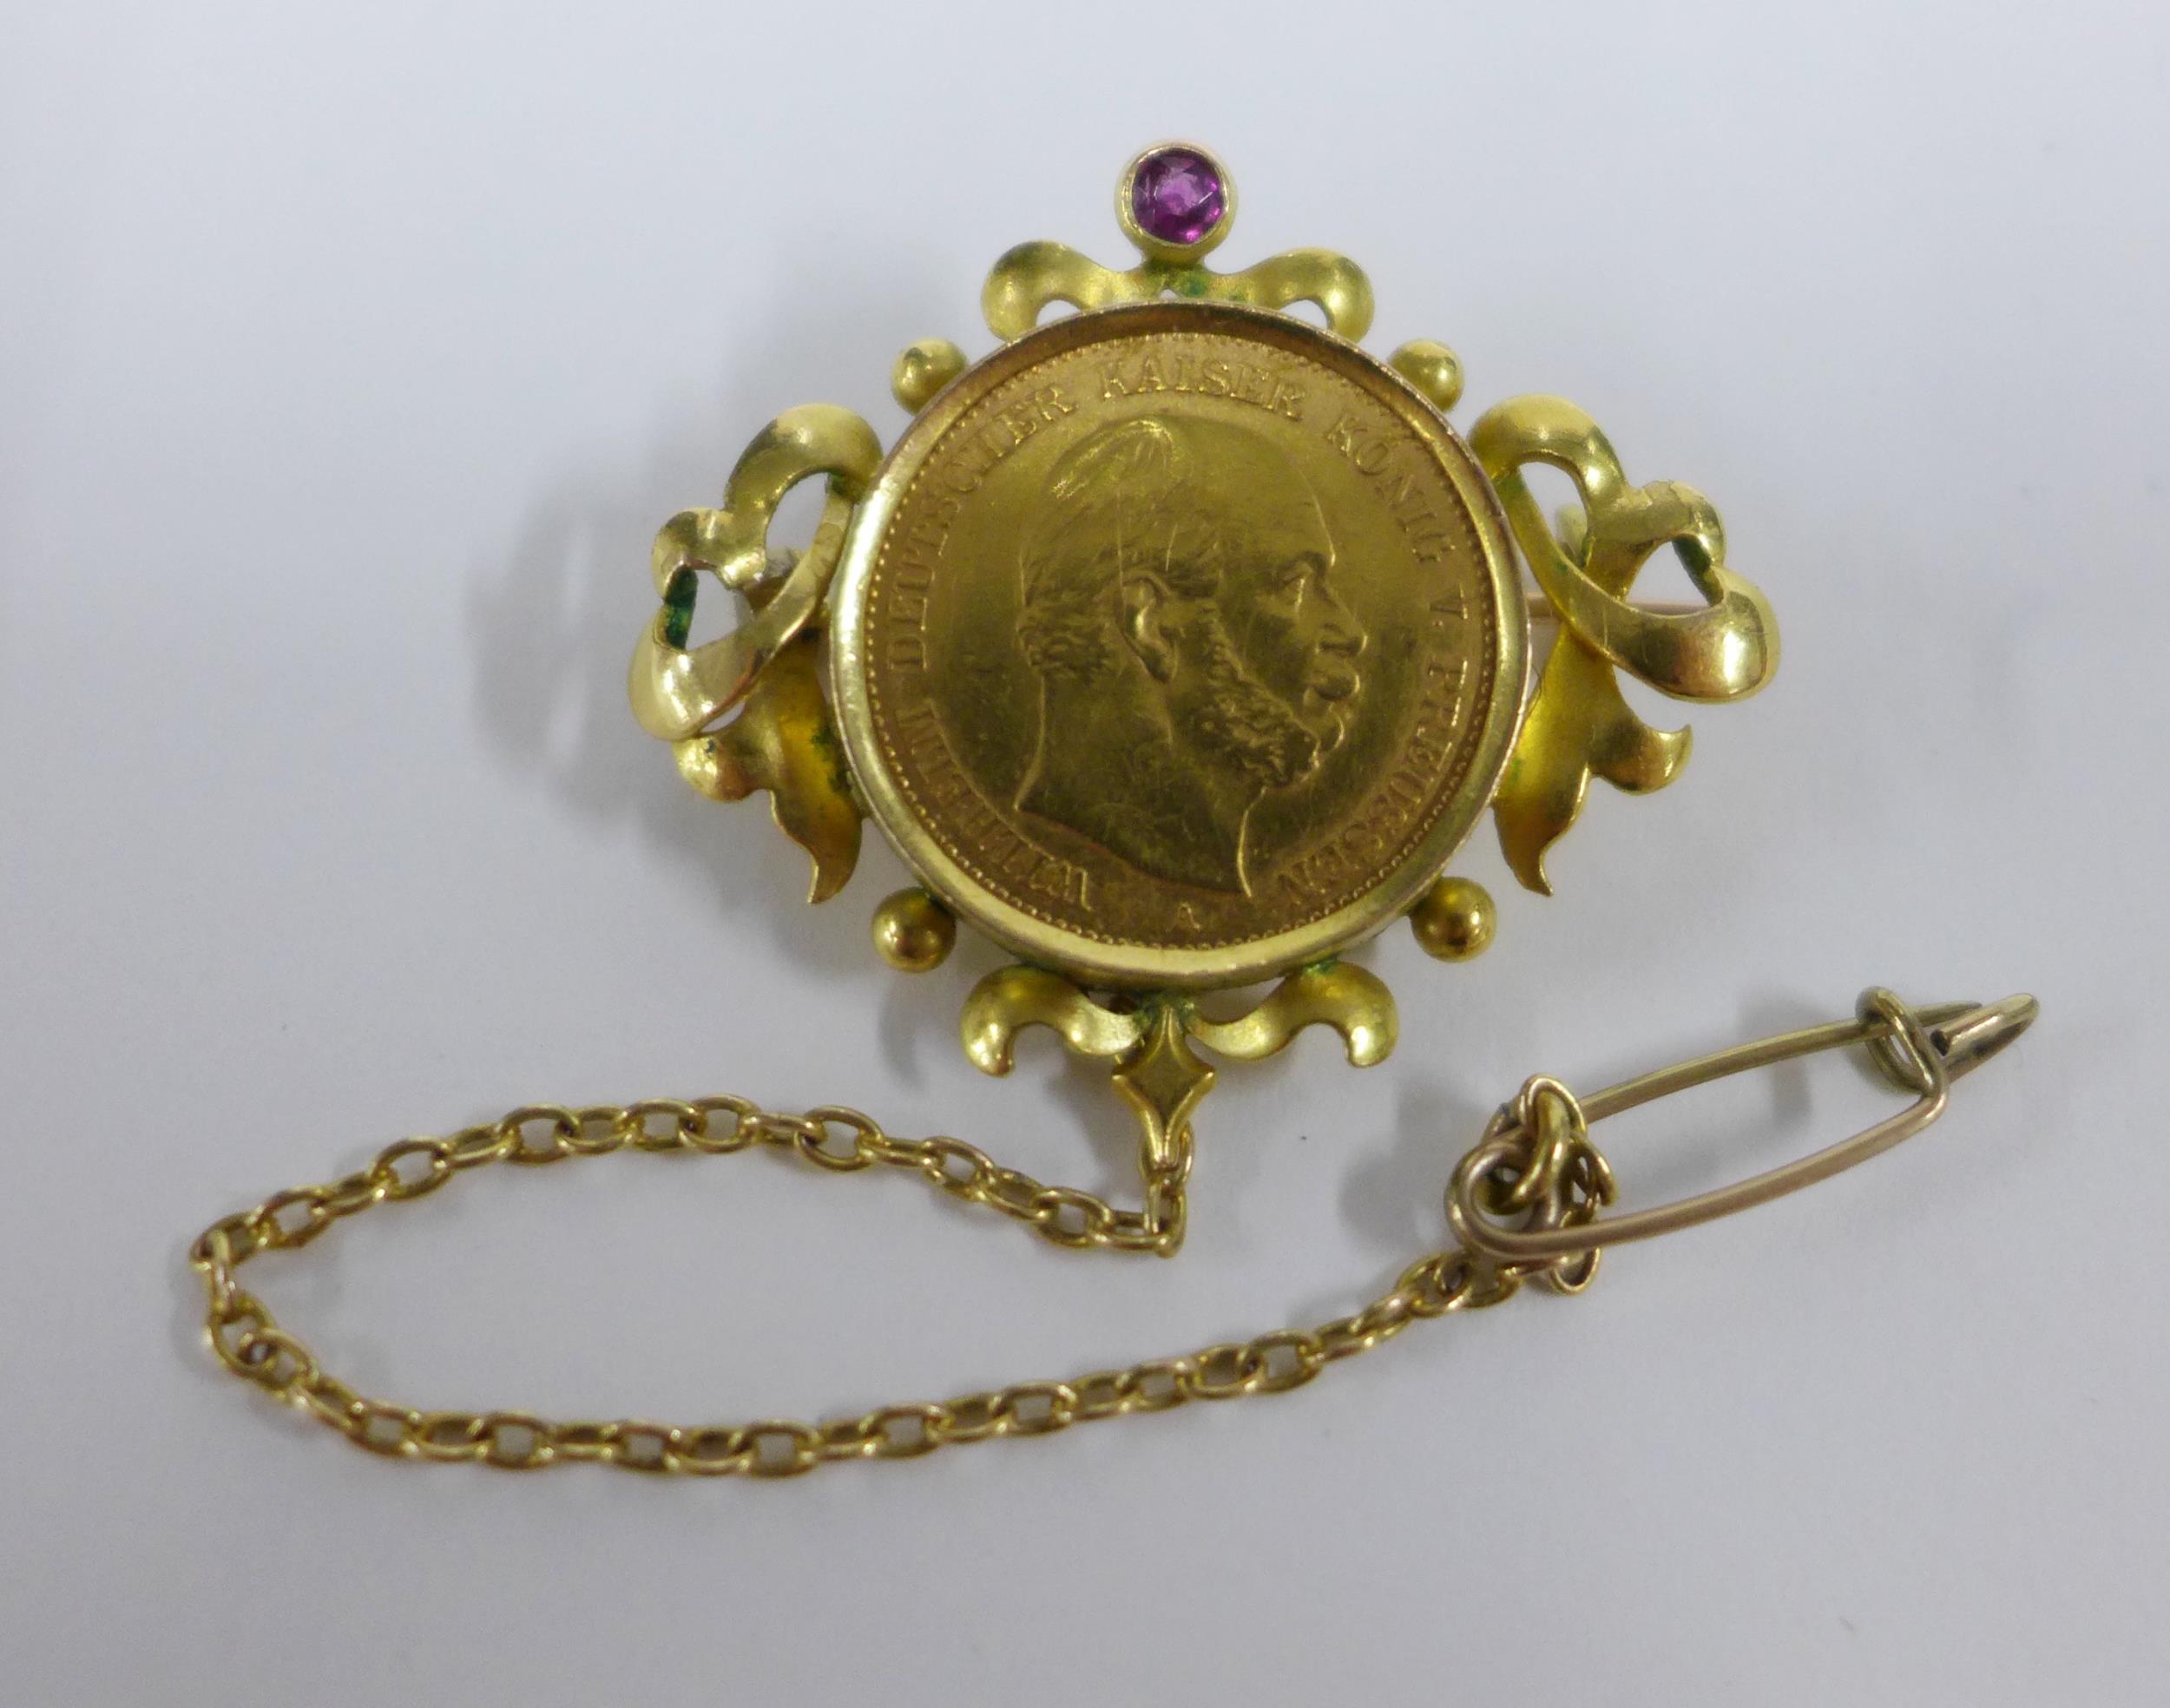 German 5 marks gold coin brooch, 1877